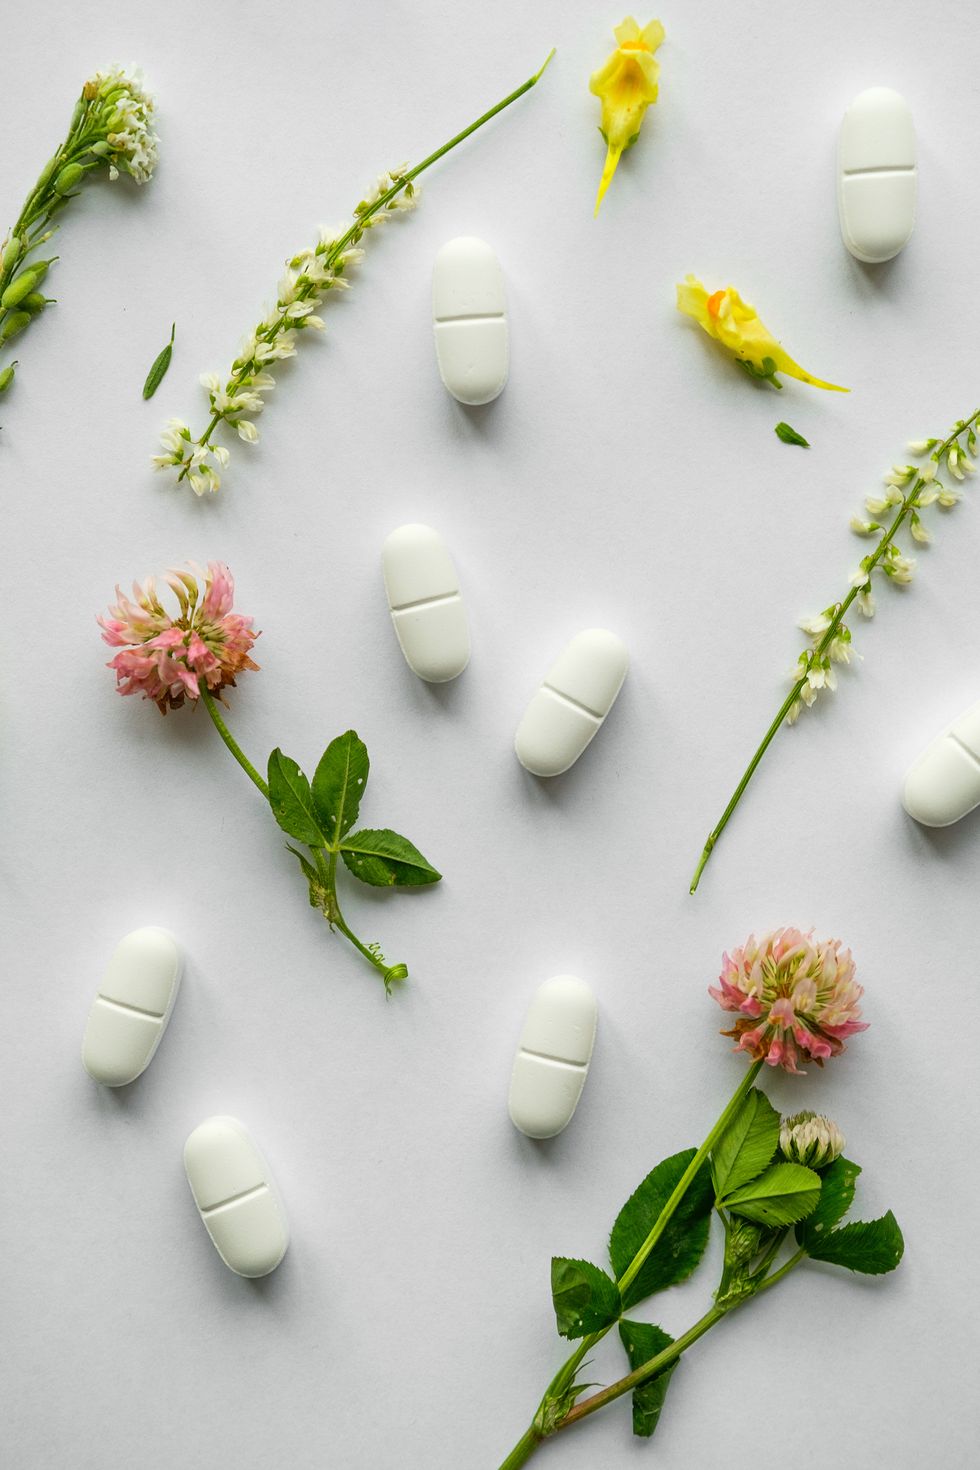 flowers and medicinal herbs, on a white background next to organic natural tablets and capsules on an herbal basis the concept of alternative medicine and health care, homeopathy treatment and prevention of diseases, taking medications